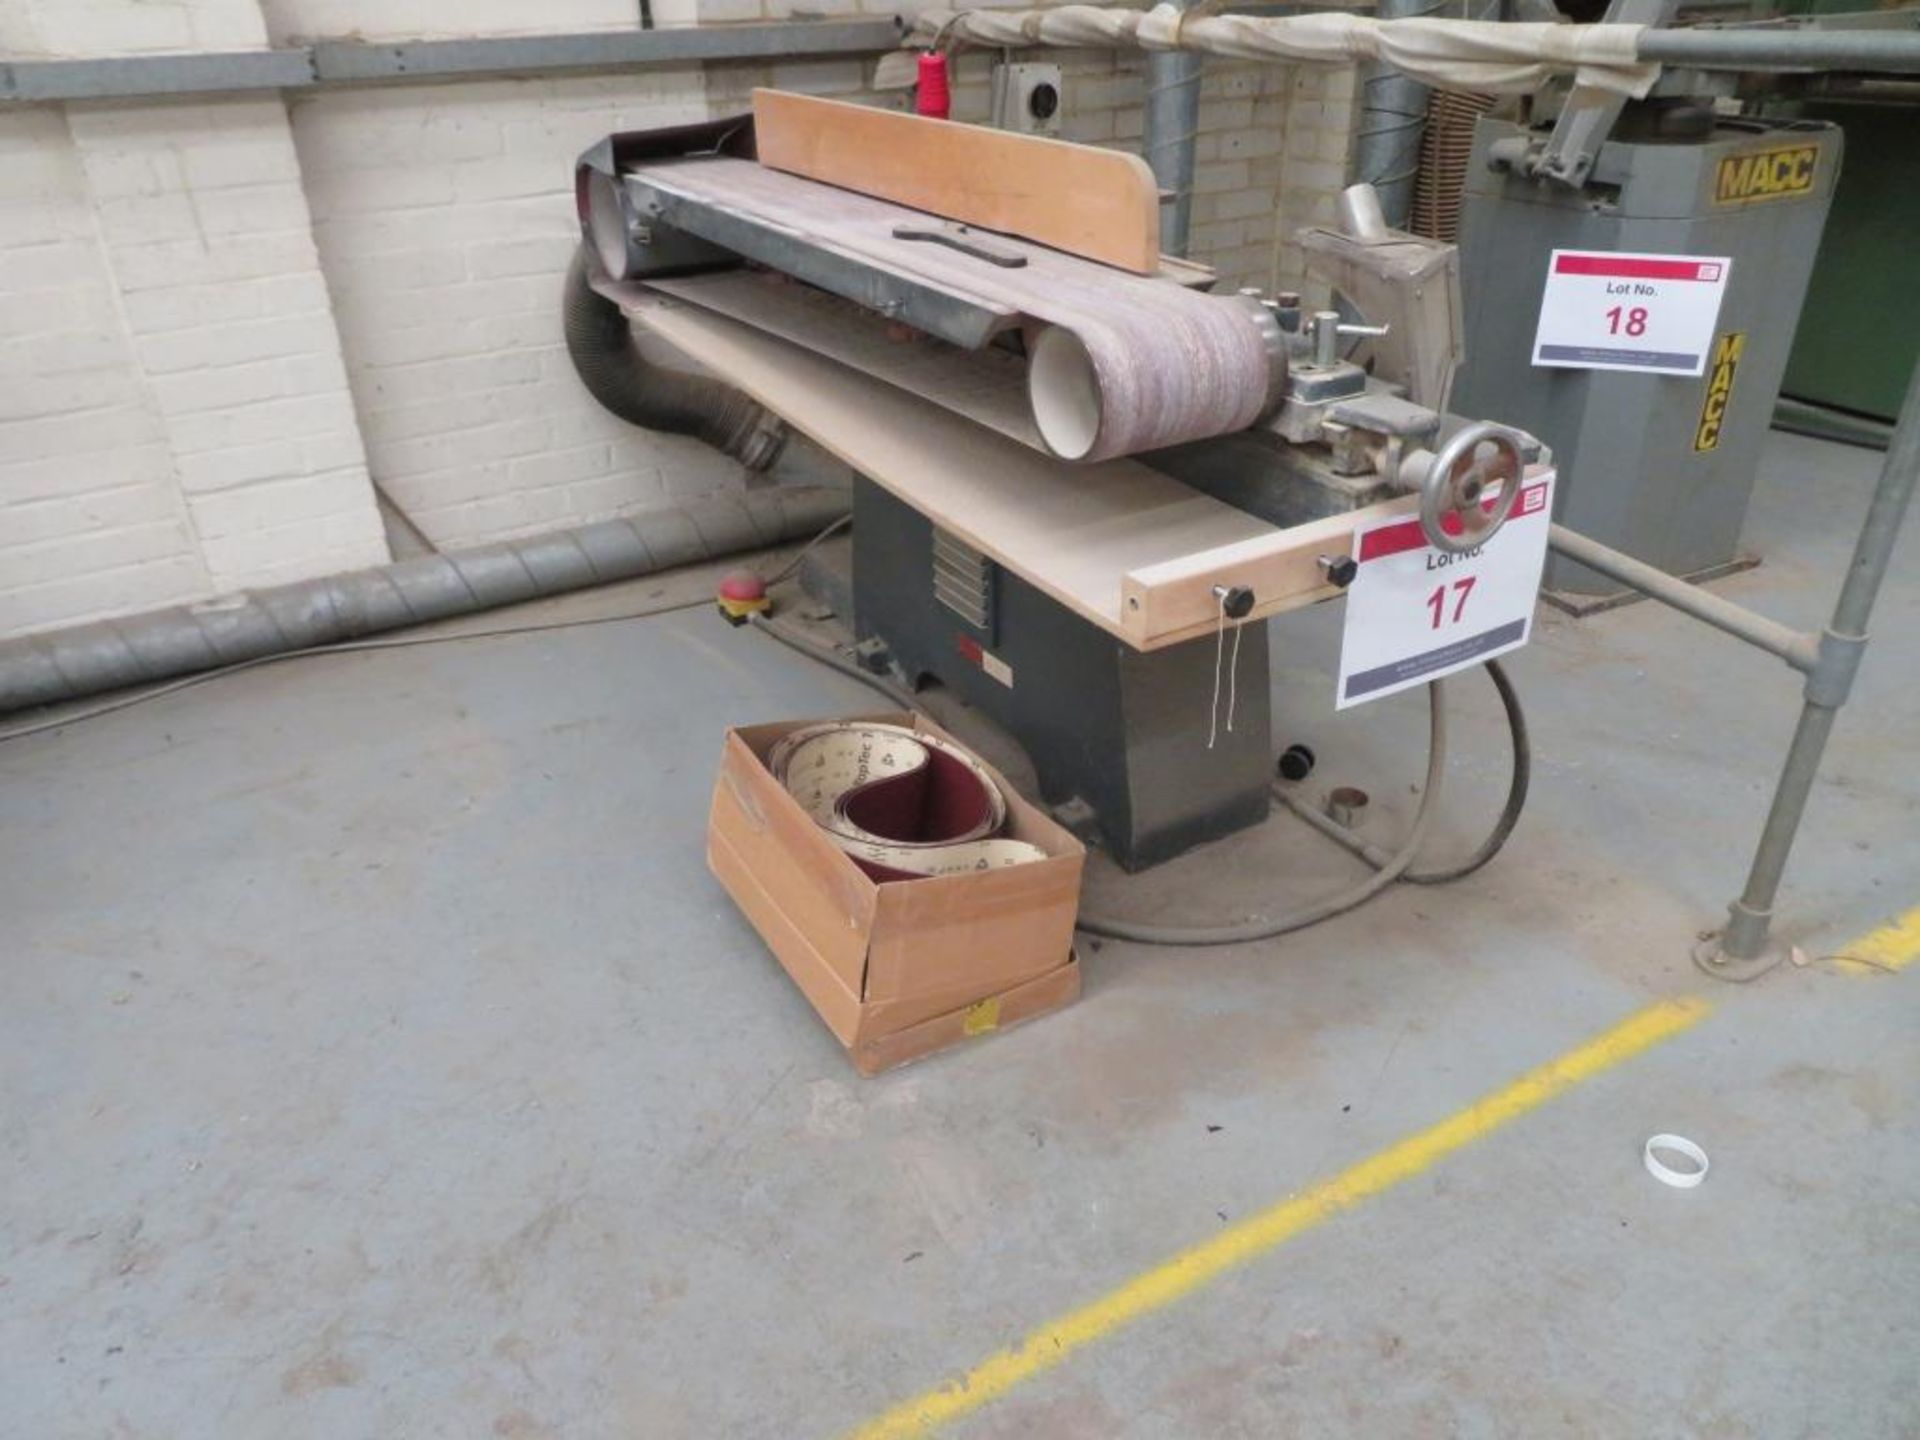 Whitehead horizontal belt sander, Type: ST, Serial No. 52669. NB. A work Method Statement and Risk